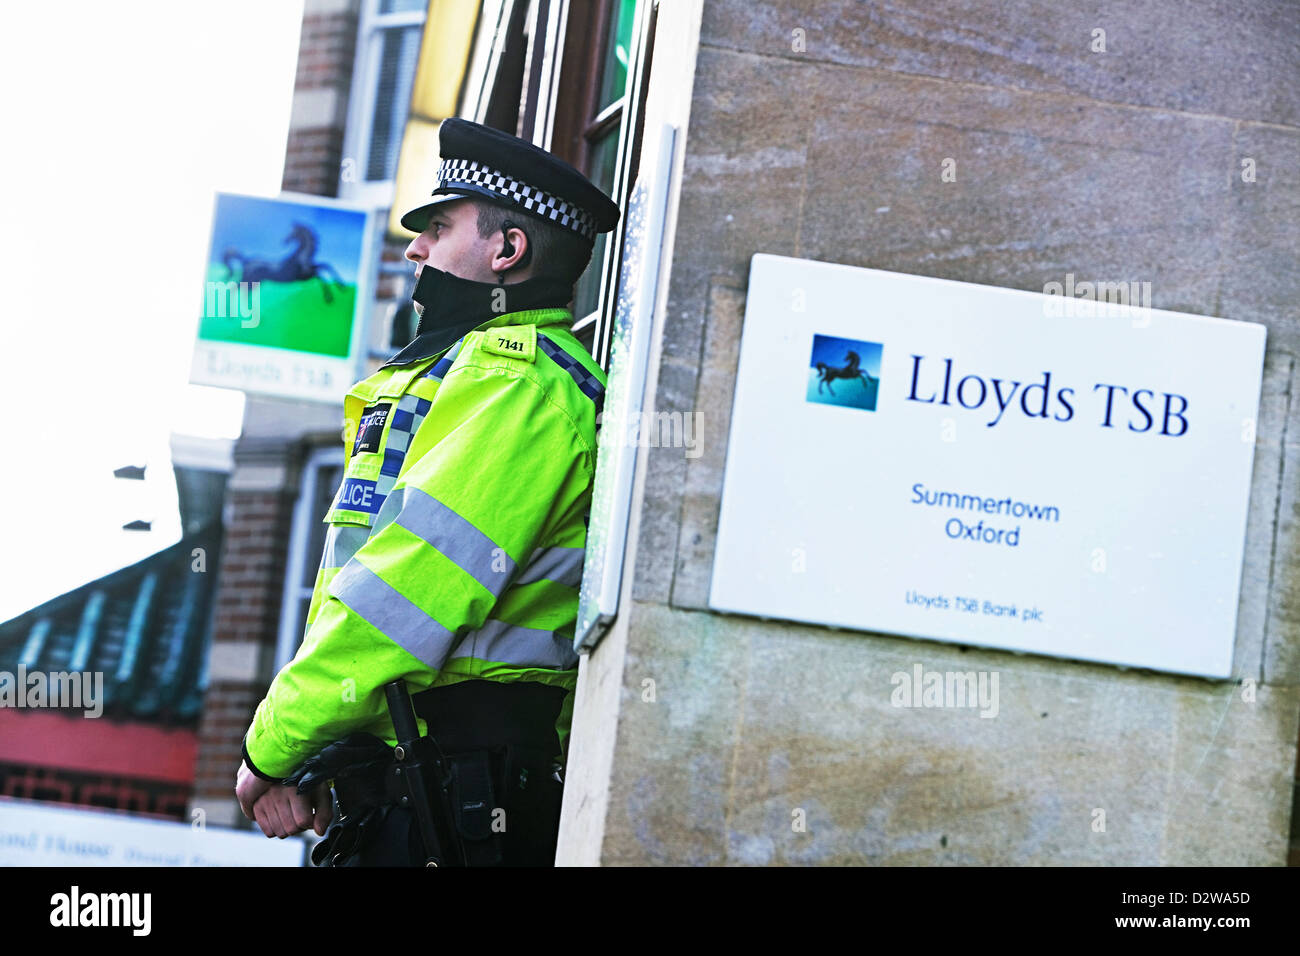 Armed Robbery at Lloyds TSB Branch in Summertown, Oxford Police presence. 19.1.12 Stock Photo